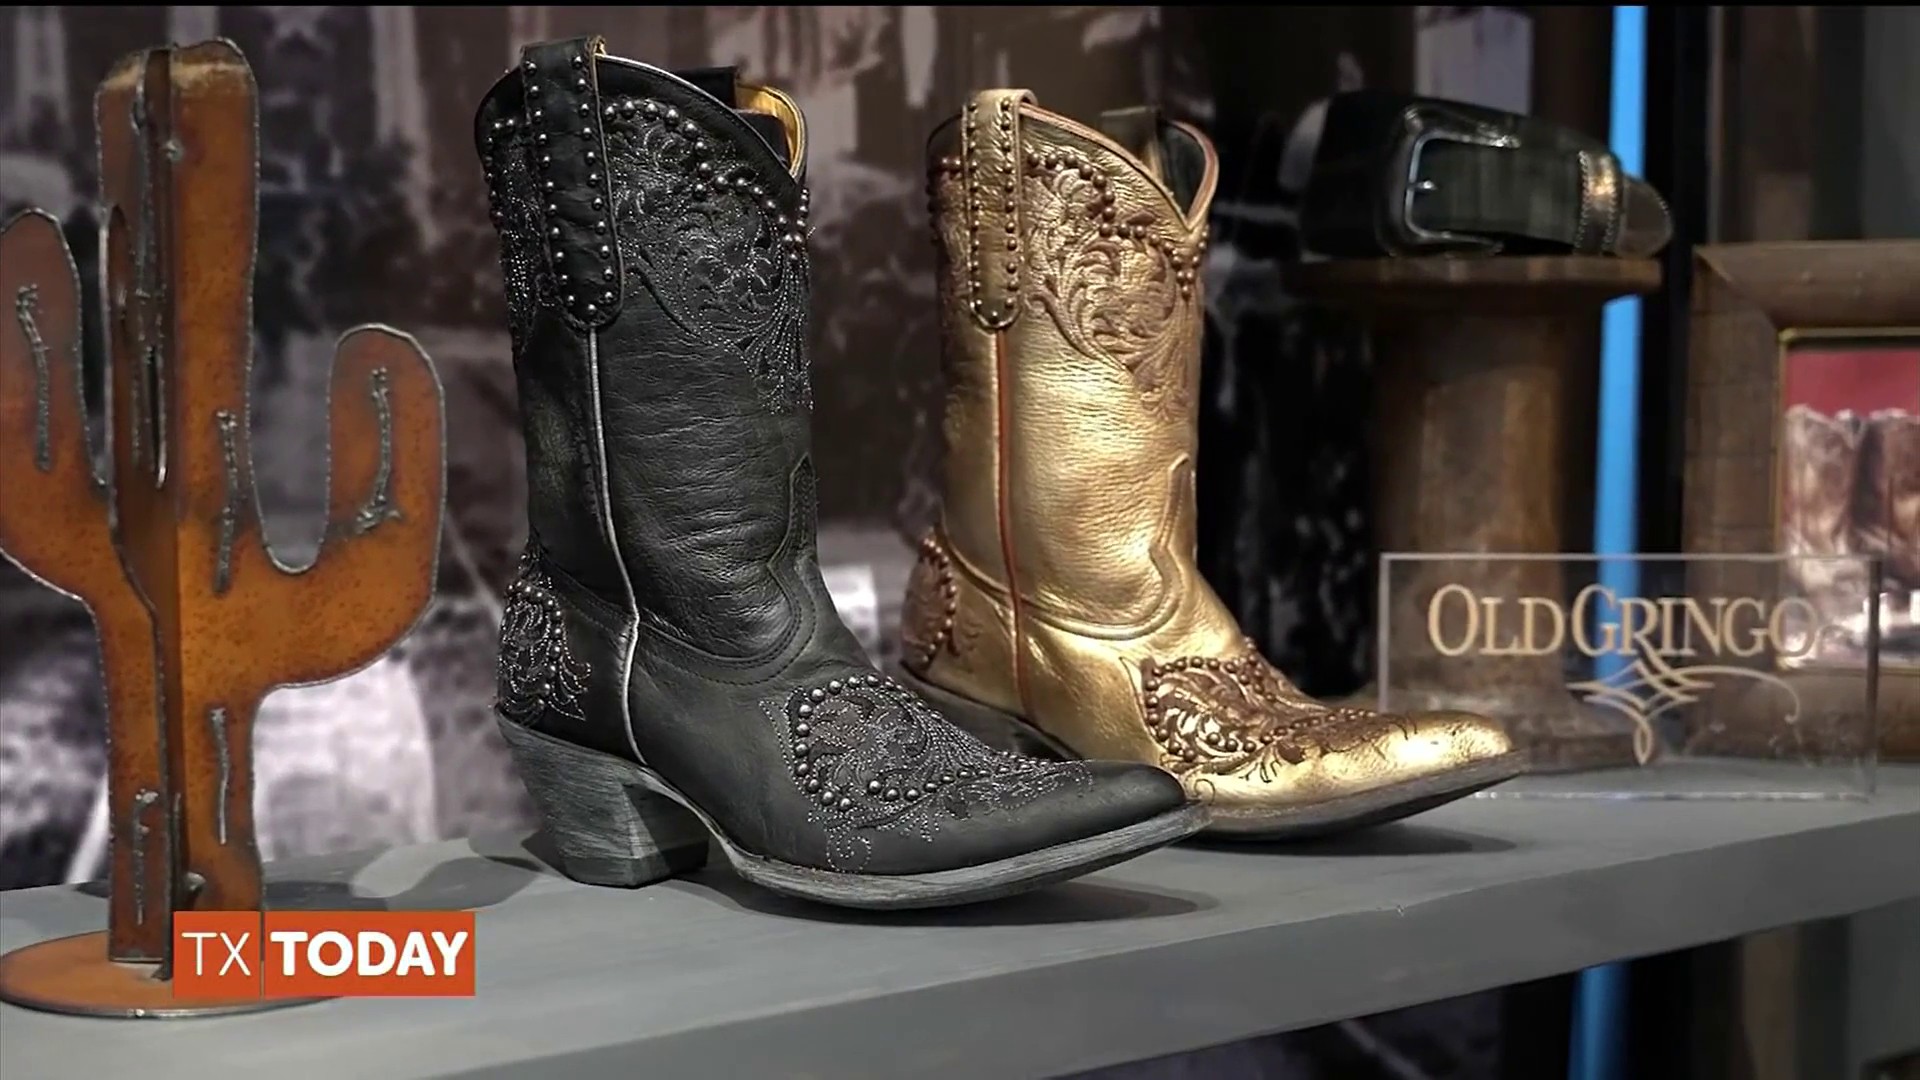 The Artistry Behind Old Gringo Boots – NBC 5 Dallas-Fort Worth